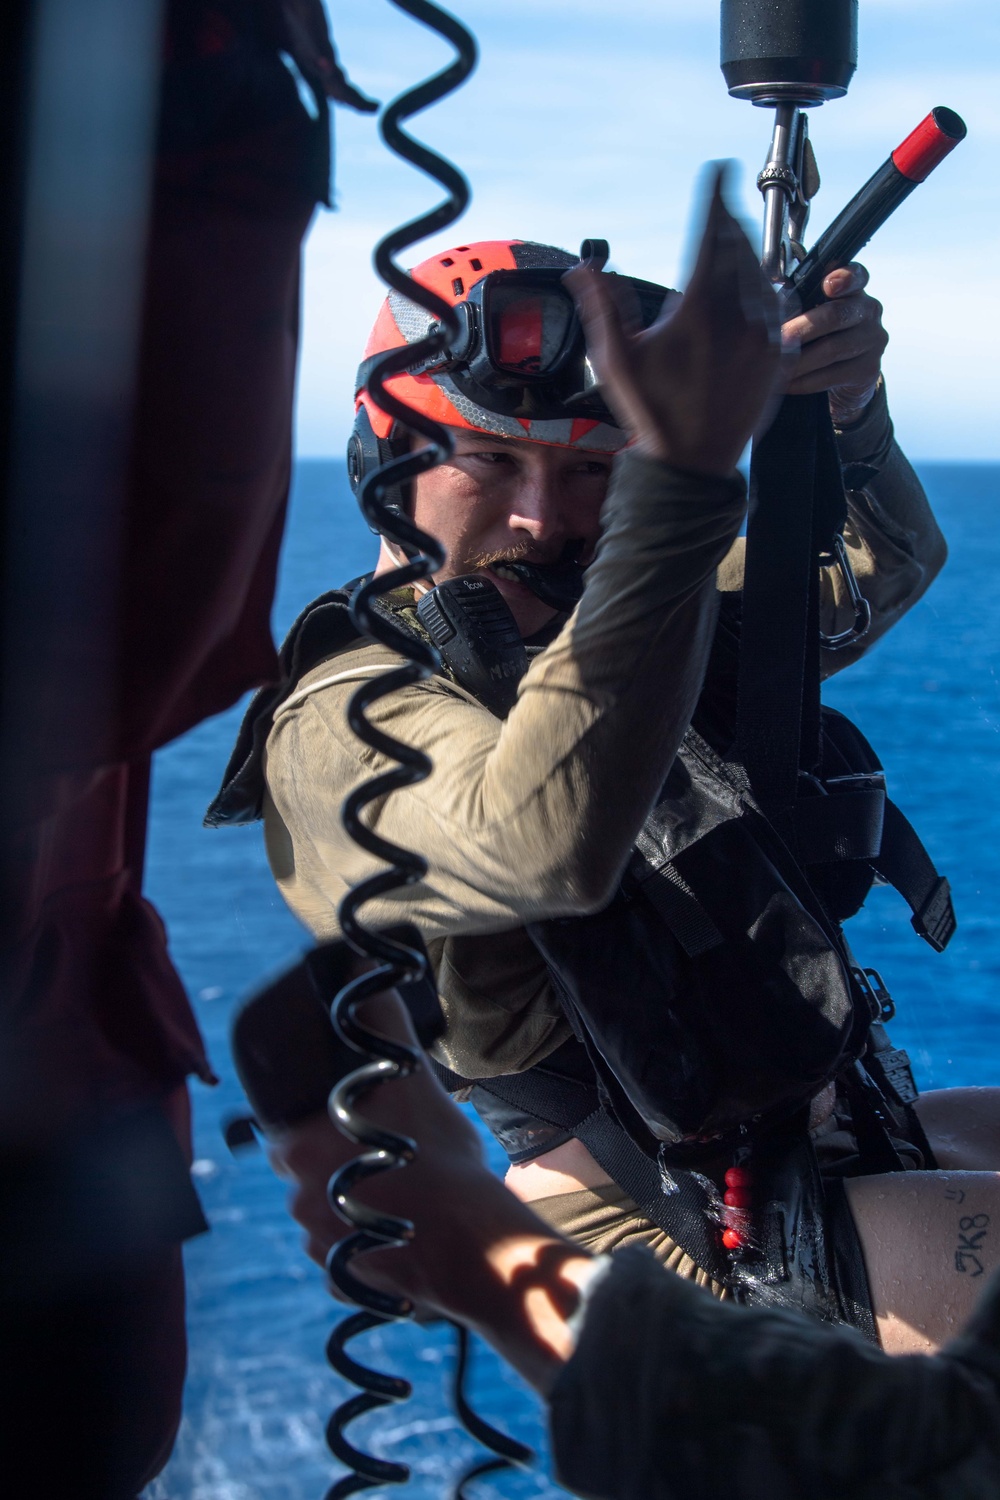 HSC-8 Conducts SAR Training with CSG-9, Theodore Roosevelt